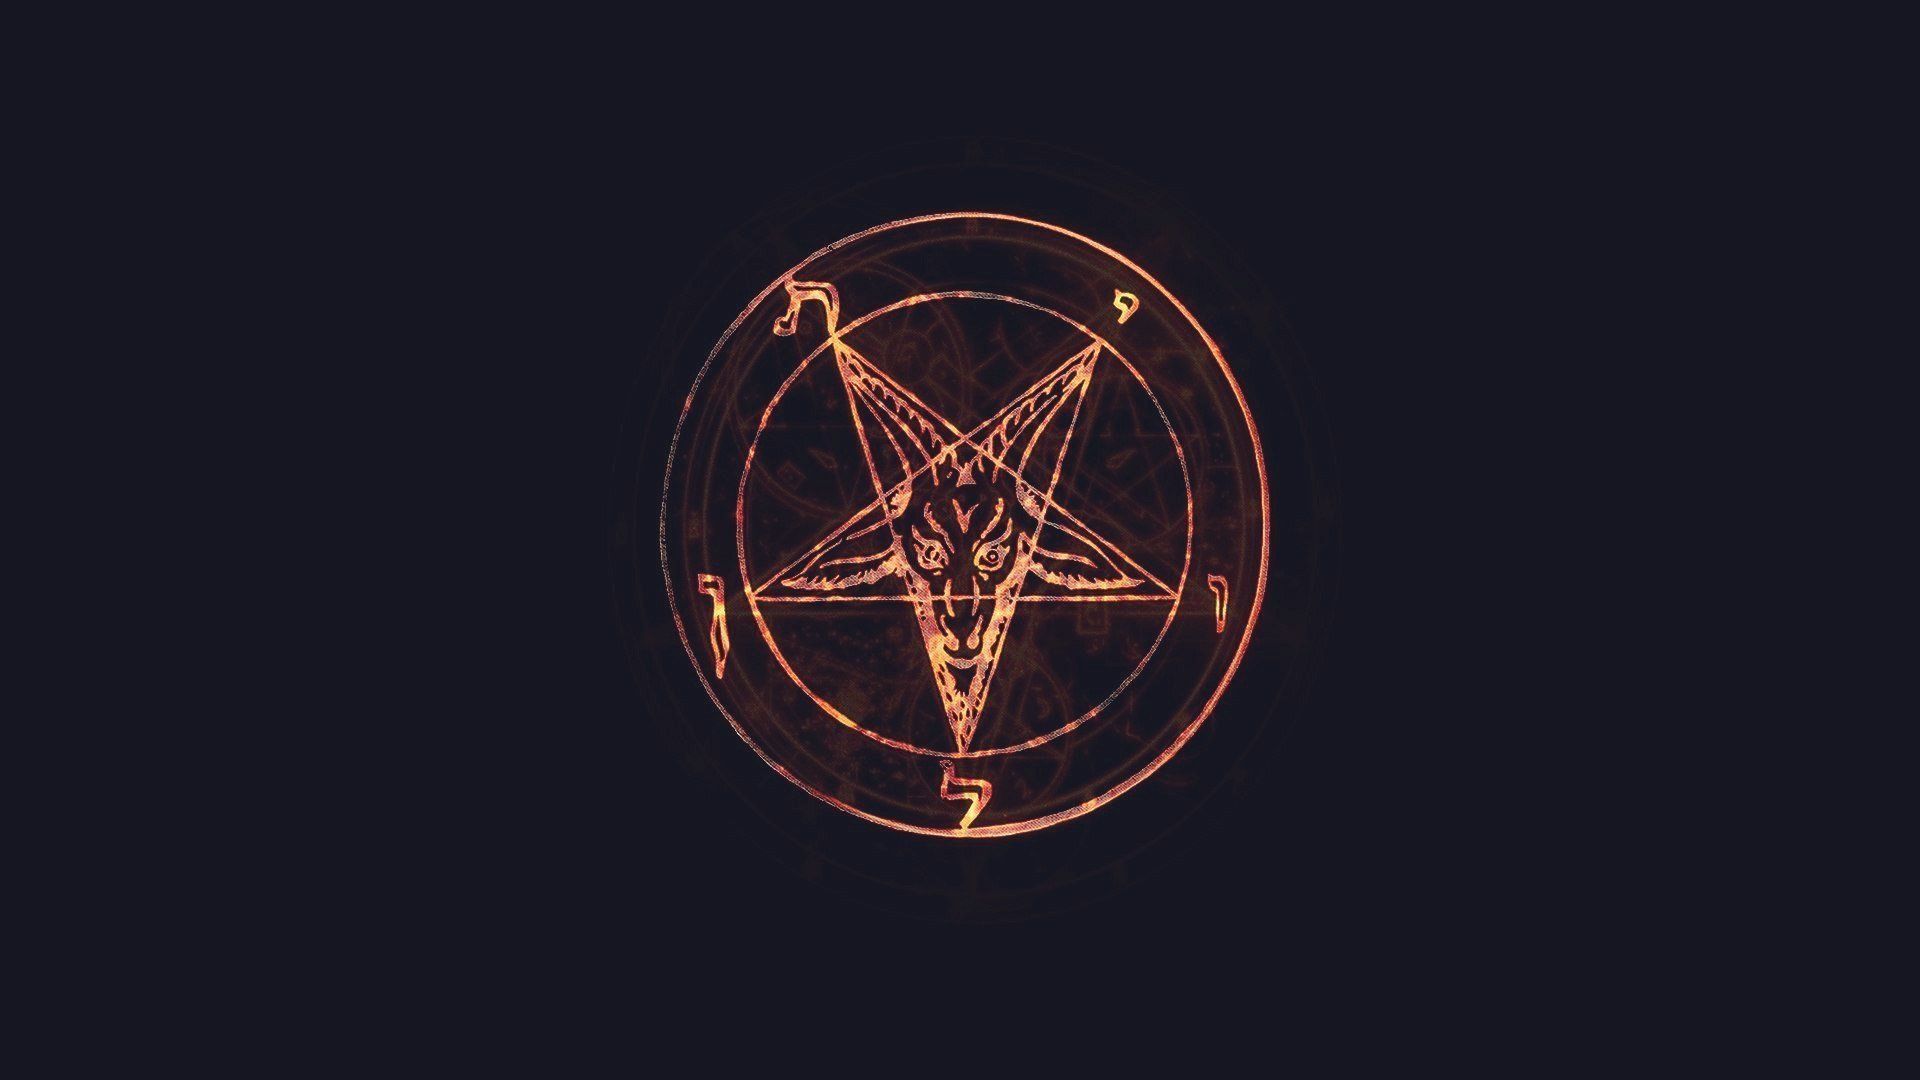 Image result for lucifer signs HD wallpaper. Star wallpaper, Satanic art, Desktop wallpaper art